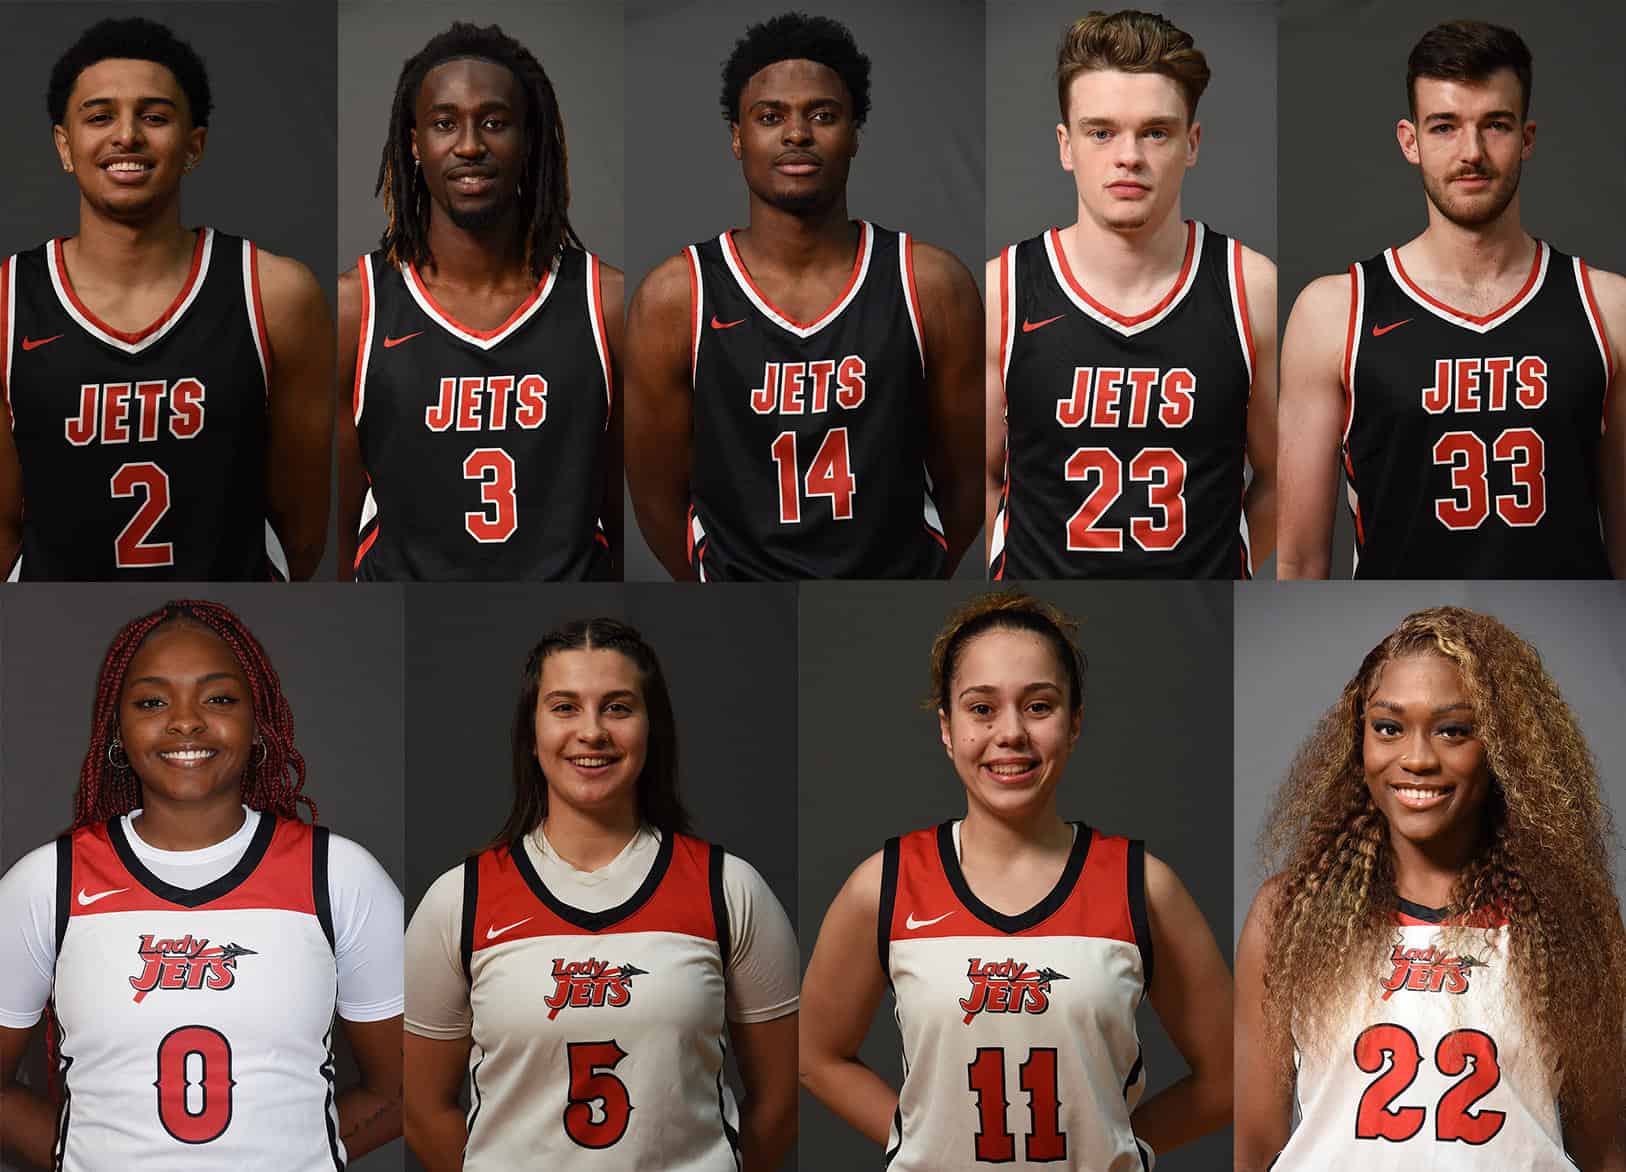 Shown above are the nine SGTC Jets and Lady Jets named to the GCAA All-Academic Team. The Jets are: Deonte Williams (2), Israel Momodu, (3), Ryan Djoussa (14), Justin Evans, (23), and Noah Barnett (33). The Lady Jets selected included: Isabel de Souza Bueno (0), Greta Carollo (5), Vera Gunaydin (11), and Maeva Fotsa (22).